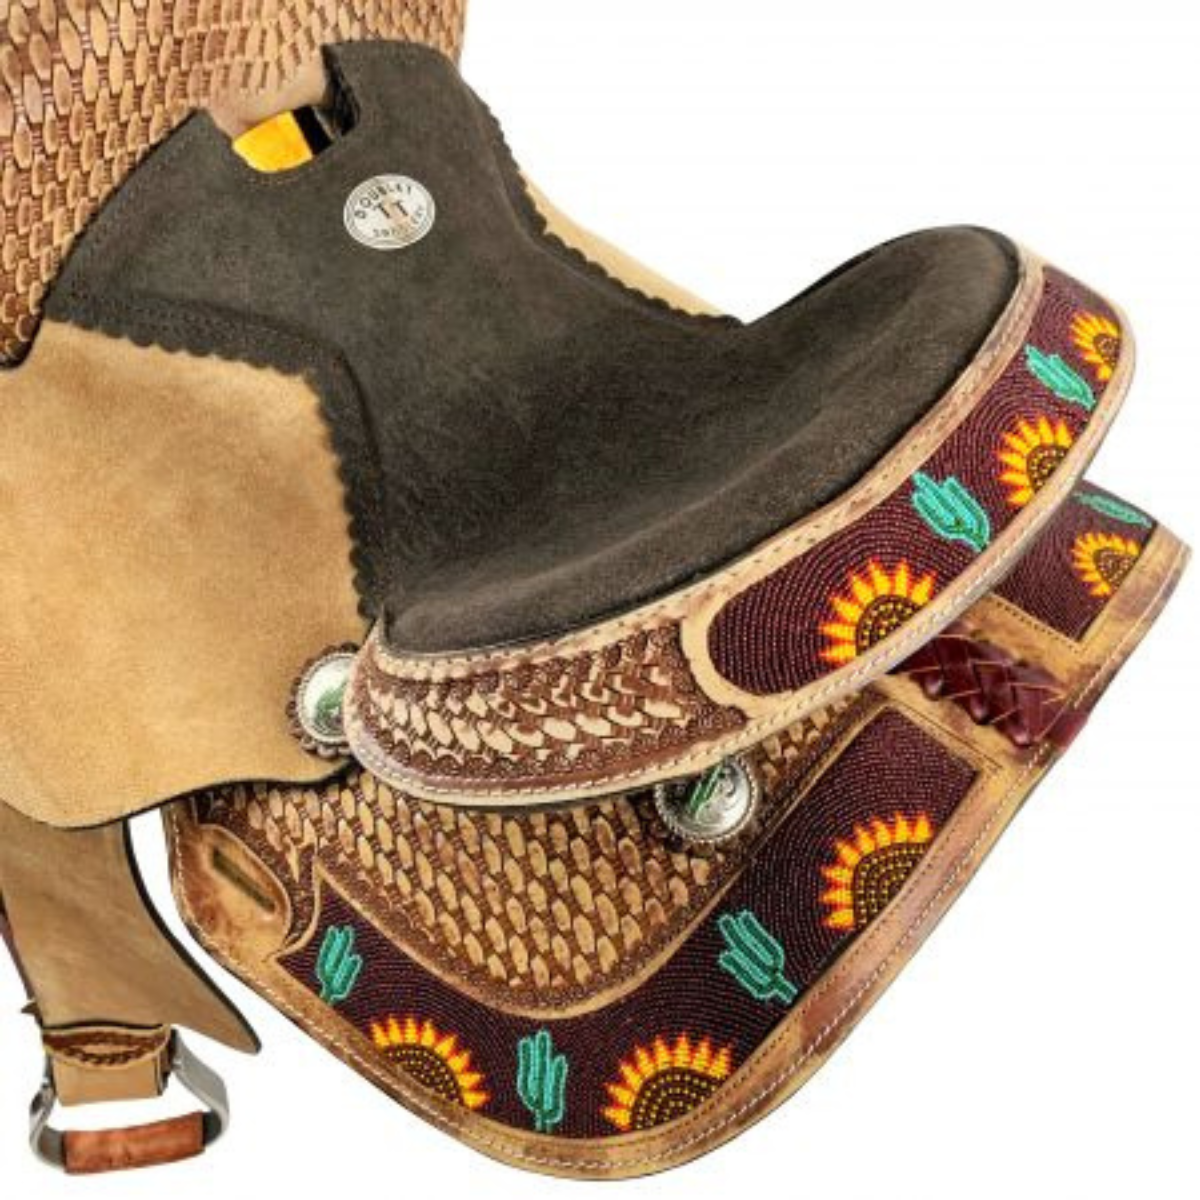 12", 13"  DOUBLE T   YOUTH HARD SEAT BARREL STYLE SADDLE WITH CACTUS AND SUNFLOWER BEADED ACCENTS - Double T Saddles